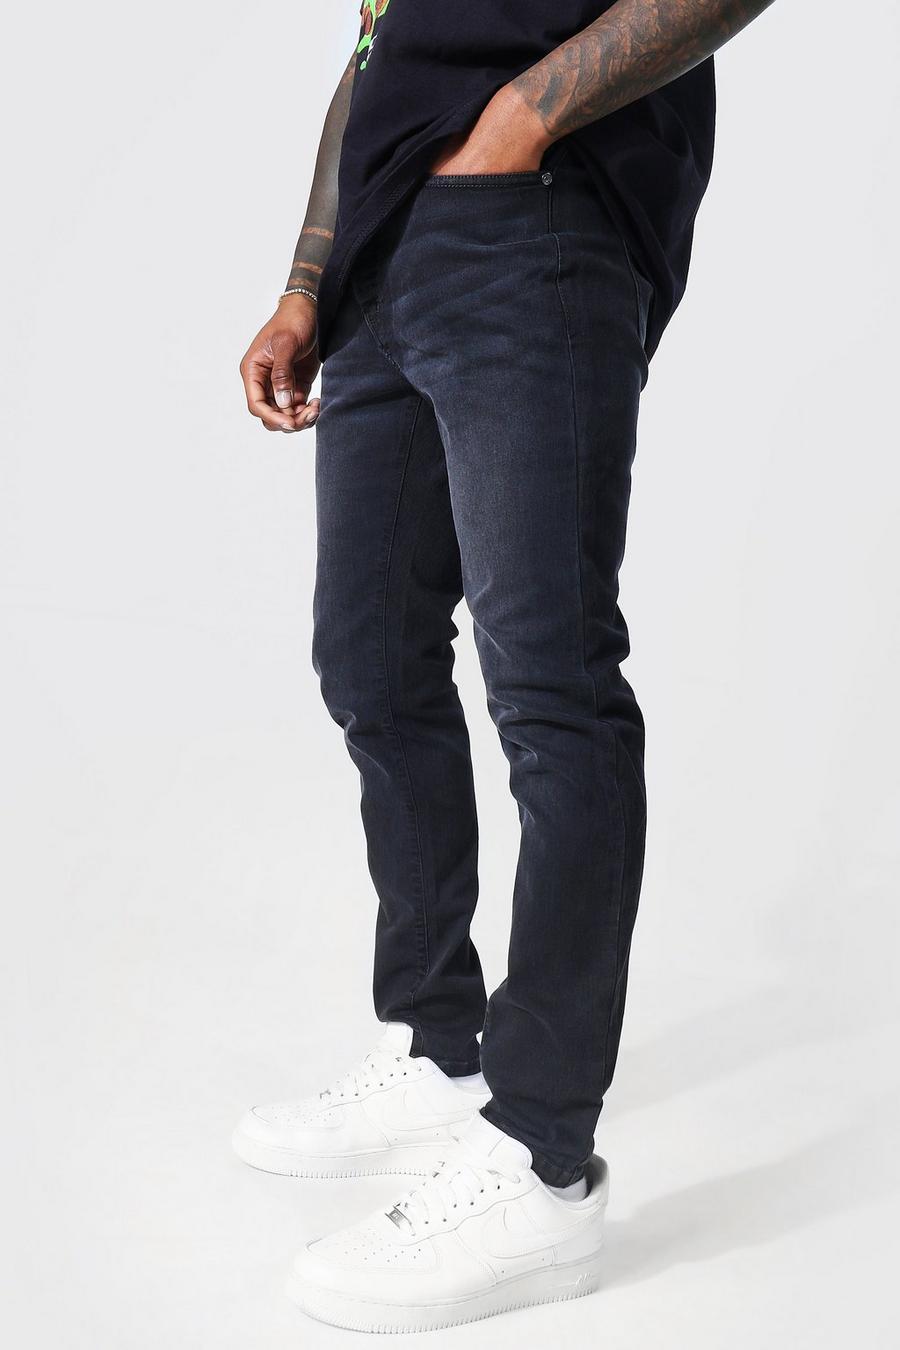 Jeans Skinny Fit in cotone organico, Charcoal image number 1